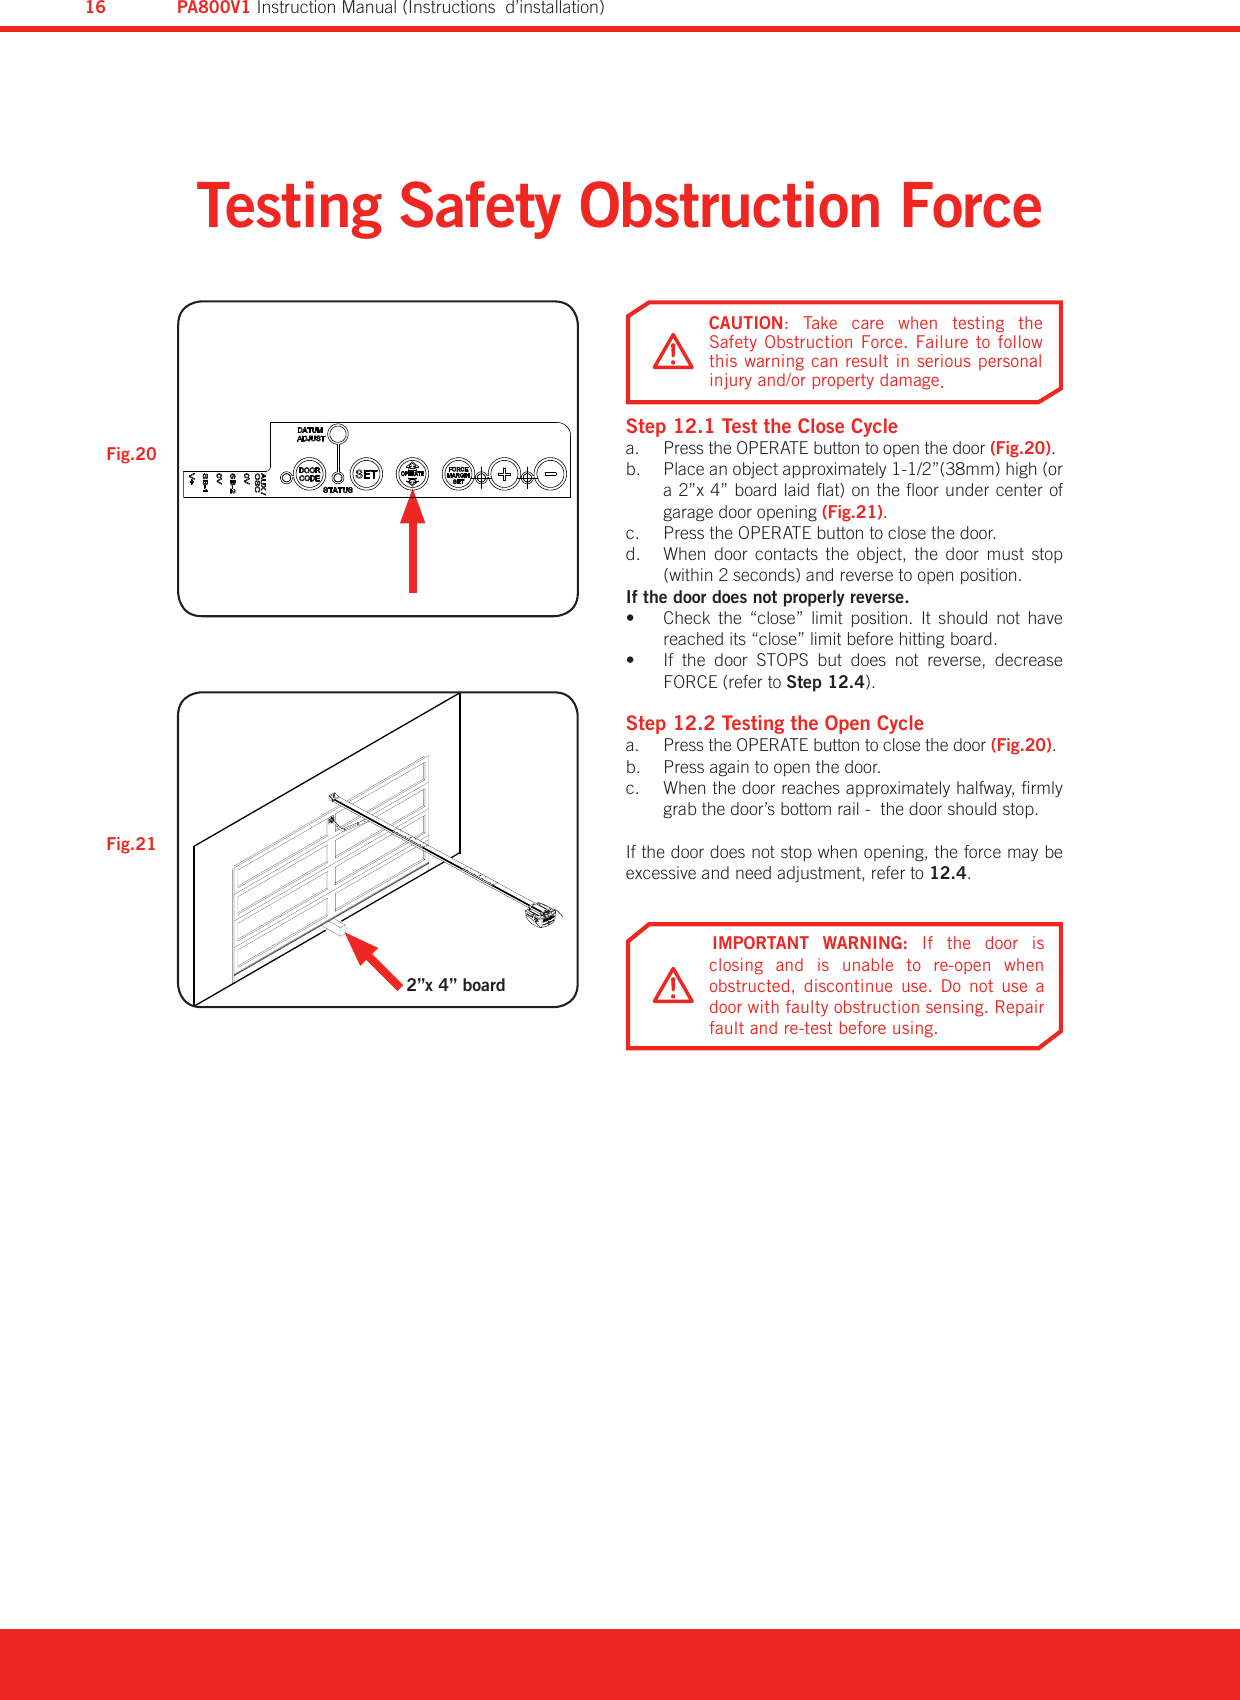 Testing Safety Obstruction ForceStep 12.1 Test the Close CyclePress the OPERATE button to open the door a.  (Fig.20).Place an object approximately 1-1/2”(38mm) high (or b. a 2”x 4” board laid at) on the oor under center of garage door opening (Fig.21).Press the OPERATE button to close the door.c. When  door  contacts  the  object,  the  door  must  stop d. (within 2 seconds) and reverse to open position.If the door does not properly reverse.Check  the  “close”  limit  position.  It  should  not  have • reached its “close” limit before hitting board.If  the  door  STOPS  but  does  not  reverse,  decrease • FORCE (refer to Step 12.4).Step 12.2 Testing the Open CyclePress the OPERATE button to close the door a.  (Fig.20).Press again to open the door.b. When the door reaches approximately halfway, rmly c. grab the door’s bottom rail -  the door should stop.If the door does not stop when opening, the force may be excessive and need adjustment, refer to 12.4.Fig.21Fig.20IMPORTANT  WARNING:  If  the  door  is closing  and  is  unable  to  re-open  when obstructed,  discontinue  use.  Do  not  use  a door with faulty obstruction sensing. Repair fault and re-test before using.CAUTION:  Take  care  when  testing  the Safety Obstruction Force. Failure to follow this warning can result in serious personal injury and/or property damage.2”x 4” boardPA800V1 Instruction Manual (Instructions  d’installation)16